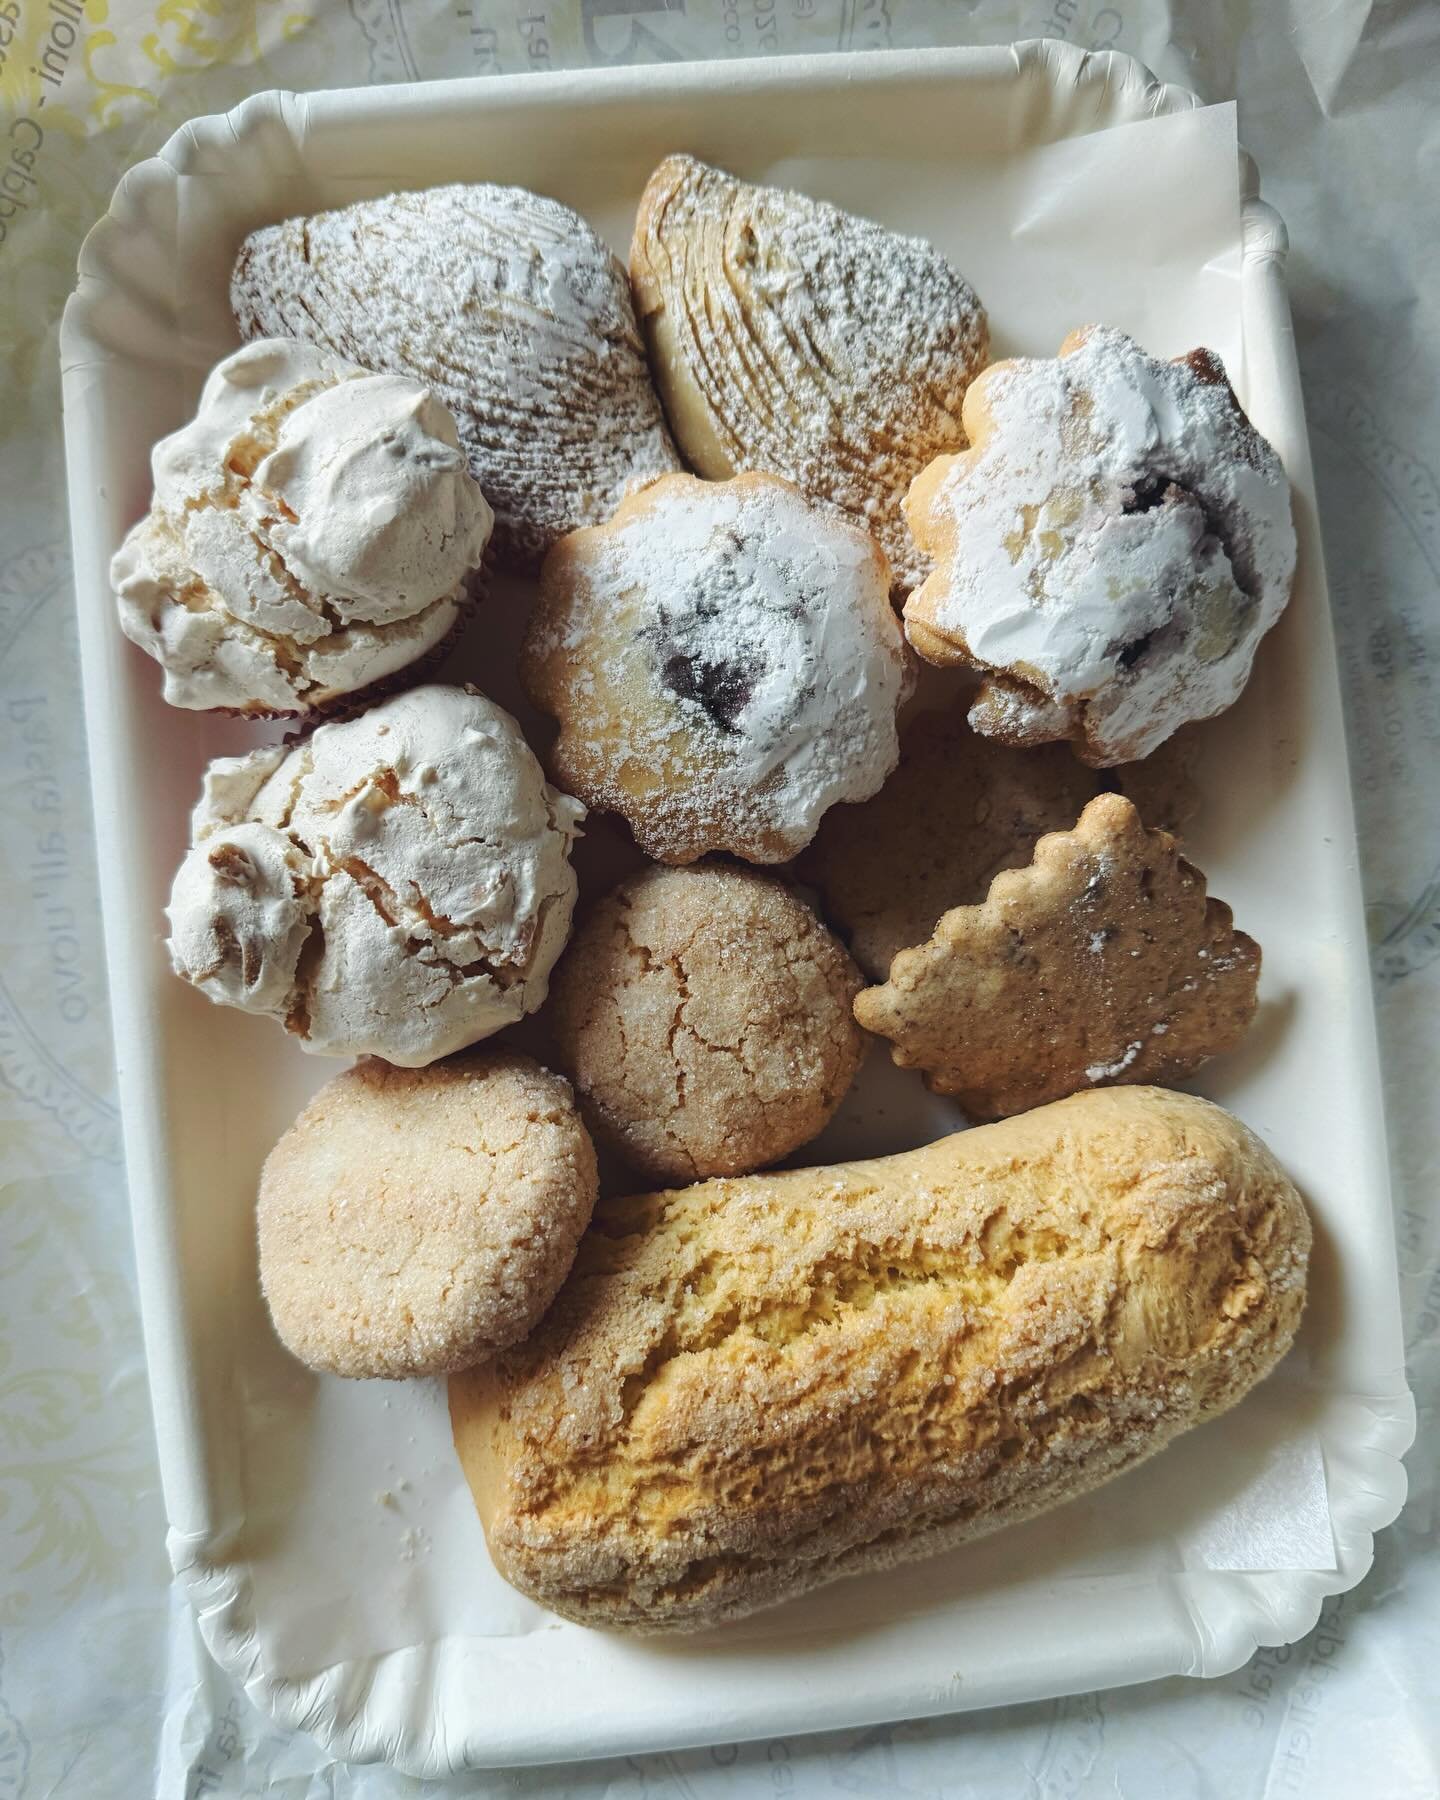 A selection of Abruzzese cookies from a local shop🌟☁️ Clockwise from the top: jam-filled sfogliatelle, bocconotti, ginger and cardamom butter frollini, a big dunking cookie, amaretti, and spumini (almond meringues).
.
Which would you like to try?
.
